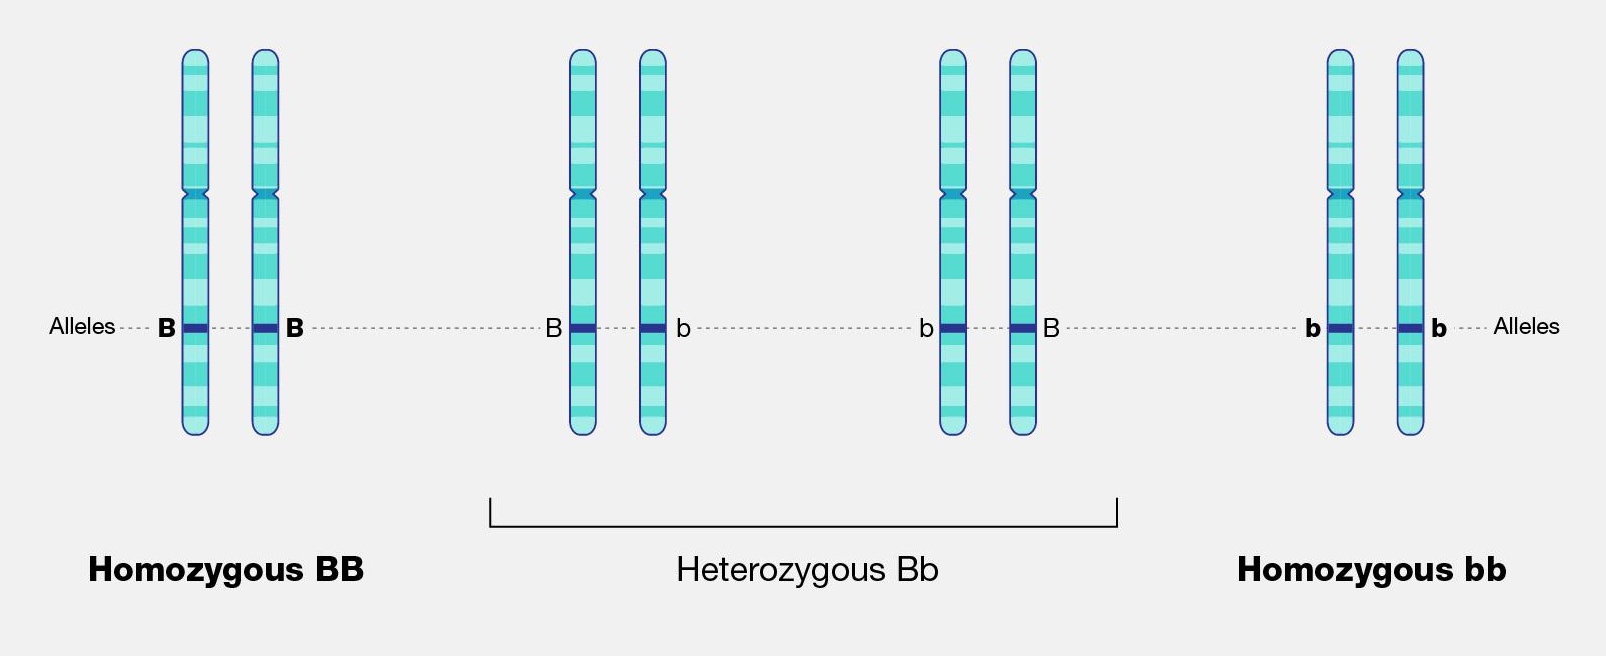 Four pairs of chromosomes. Each chromosome is labeled with an allele, either capital B or lowercase b.